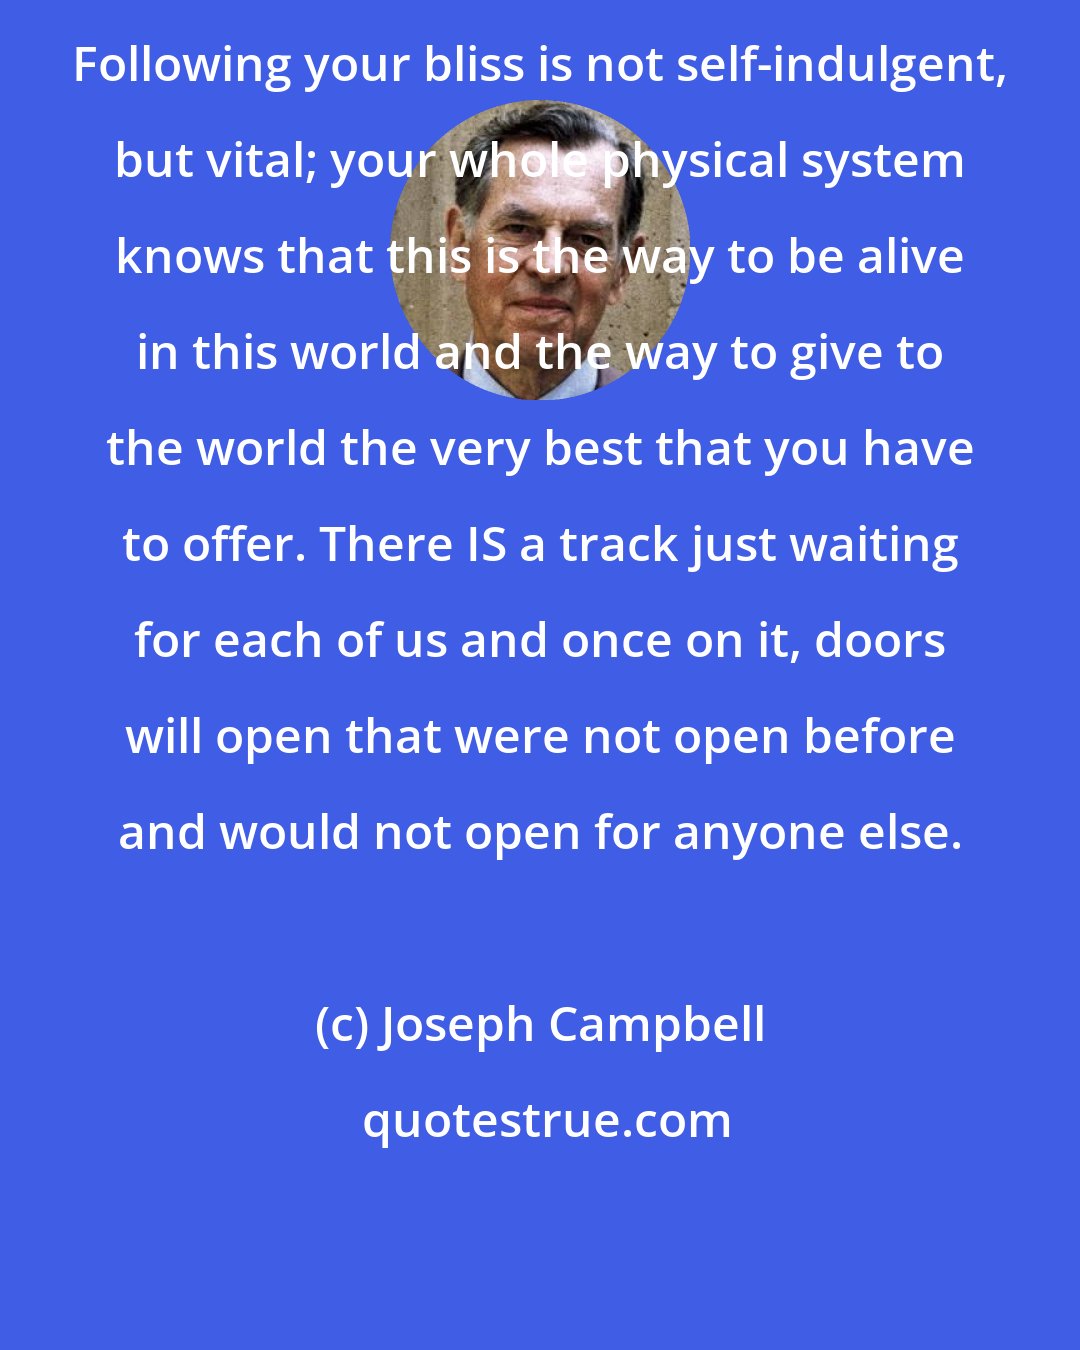 Joseph Campbell: Following your bliss is not self-indulgent, but vital; your whole physical system knows that this is the way to be alive in this world and the way to give to the world the very best that you have to offer. There IS a track just waiting for each of us and once on it, doors will open that were not open before and would not open for anyone else.